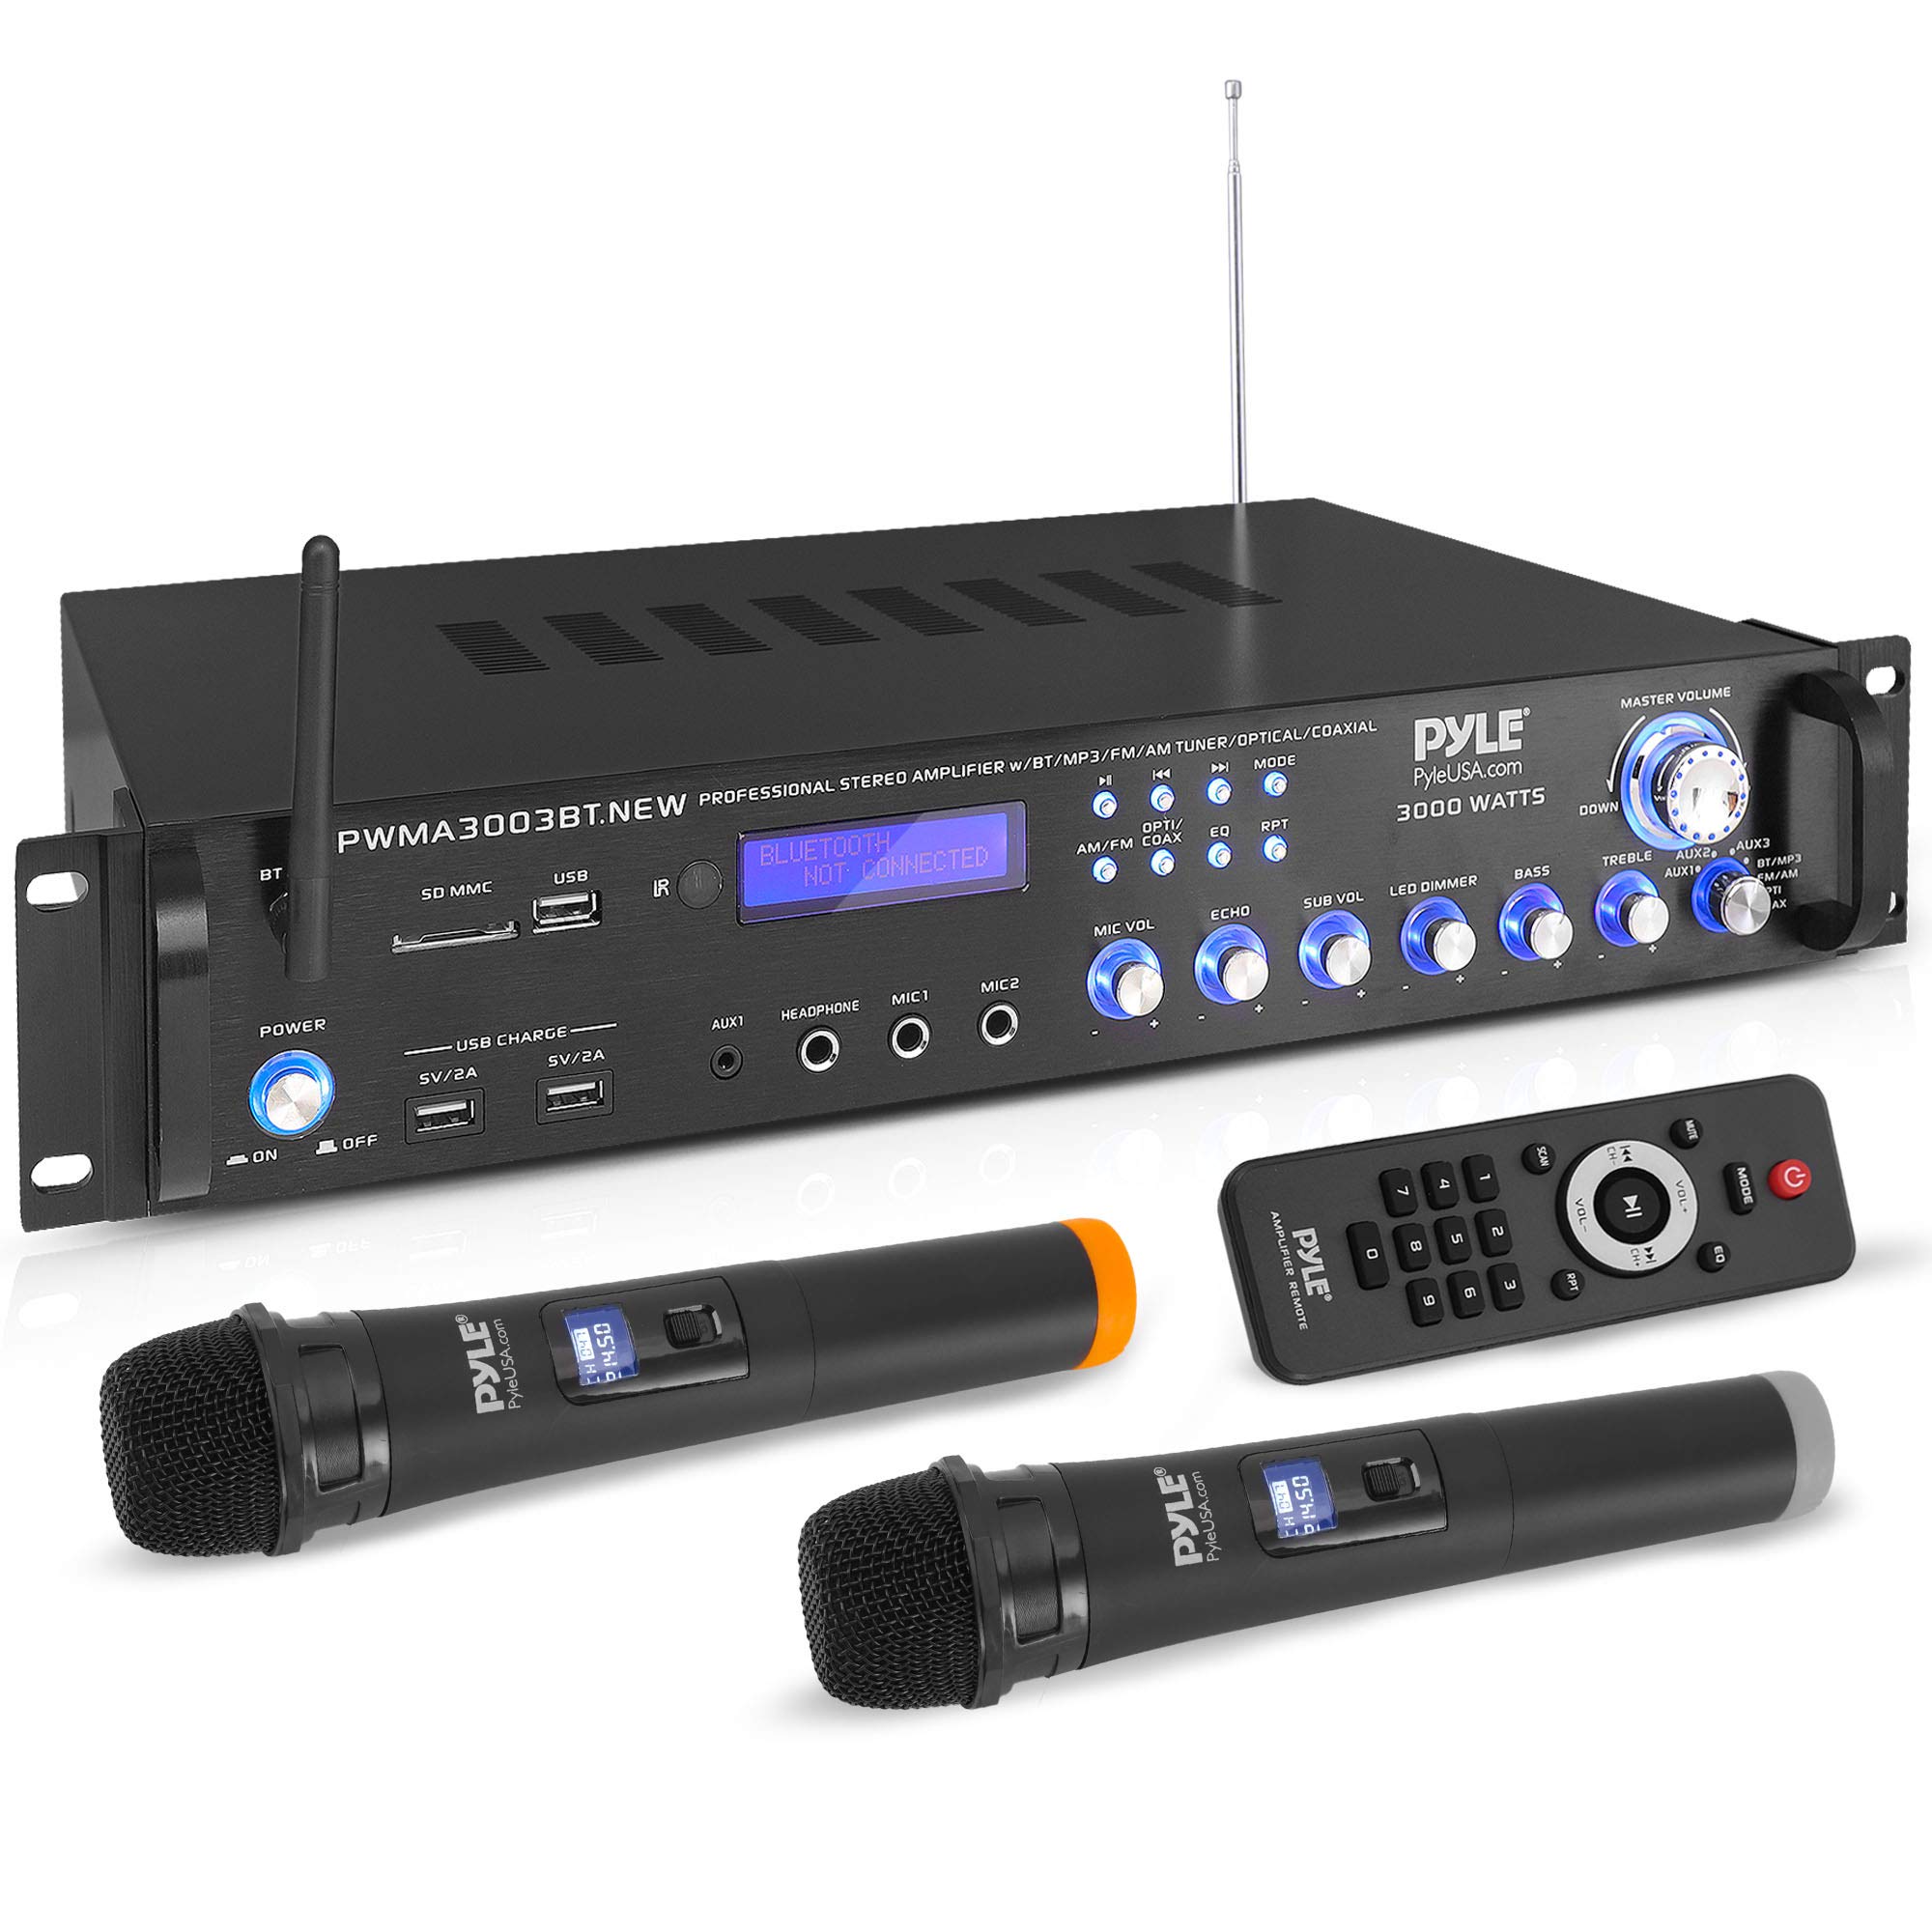 Pyle Bluetooth Home Audio Power Amplifier -4 Ch. 3000W, Stereo Receiver w/Speaker Selector, FM Radio, USB, Headphone, 2 Wireless Mics for Karaoke, Great for Home Entertainment System